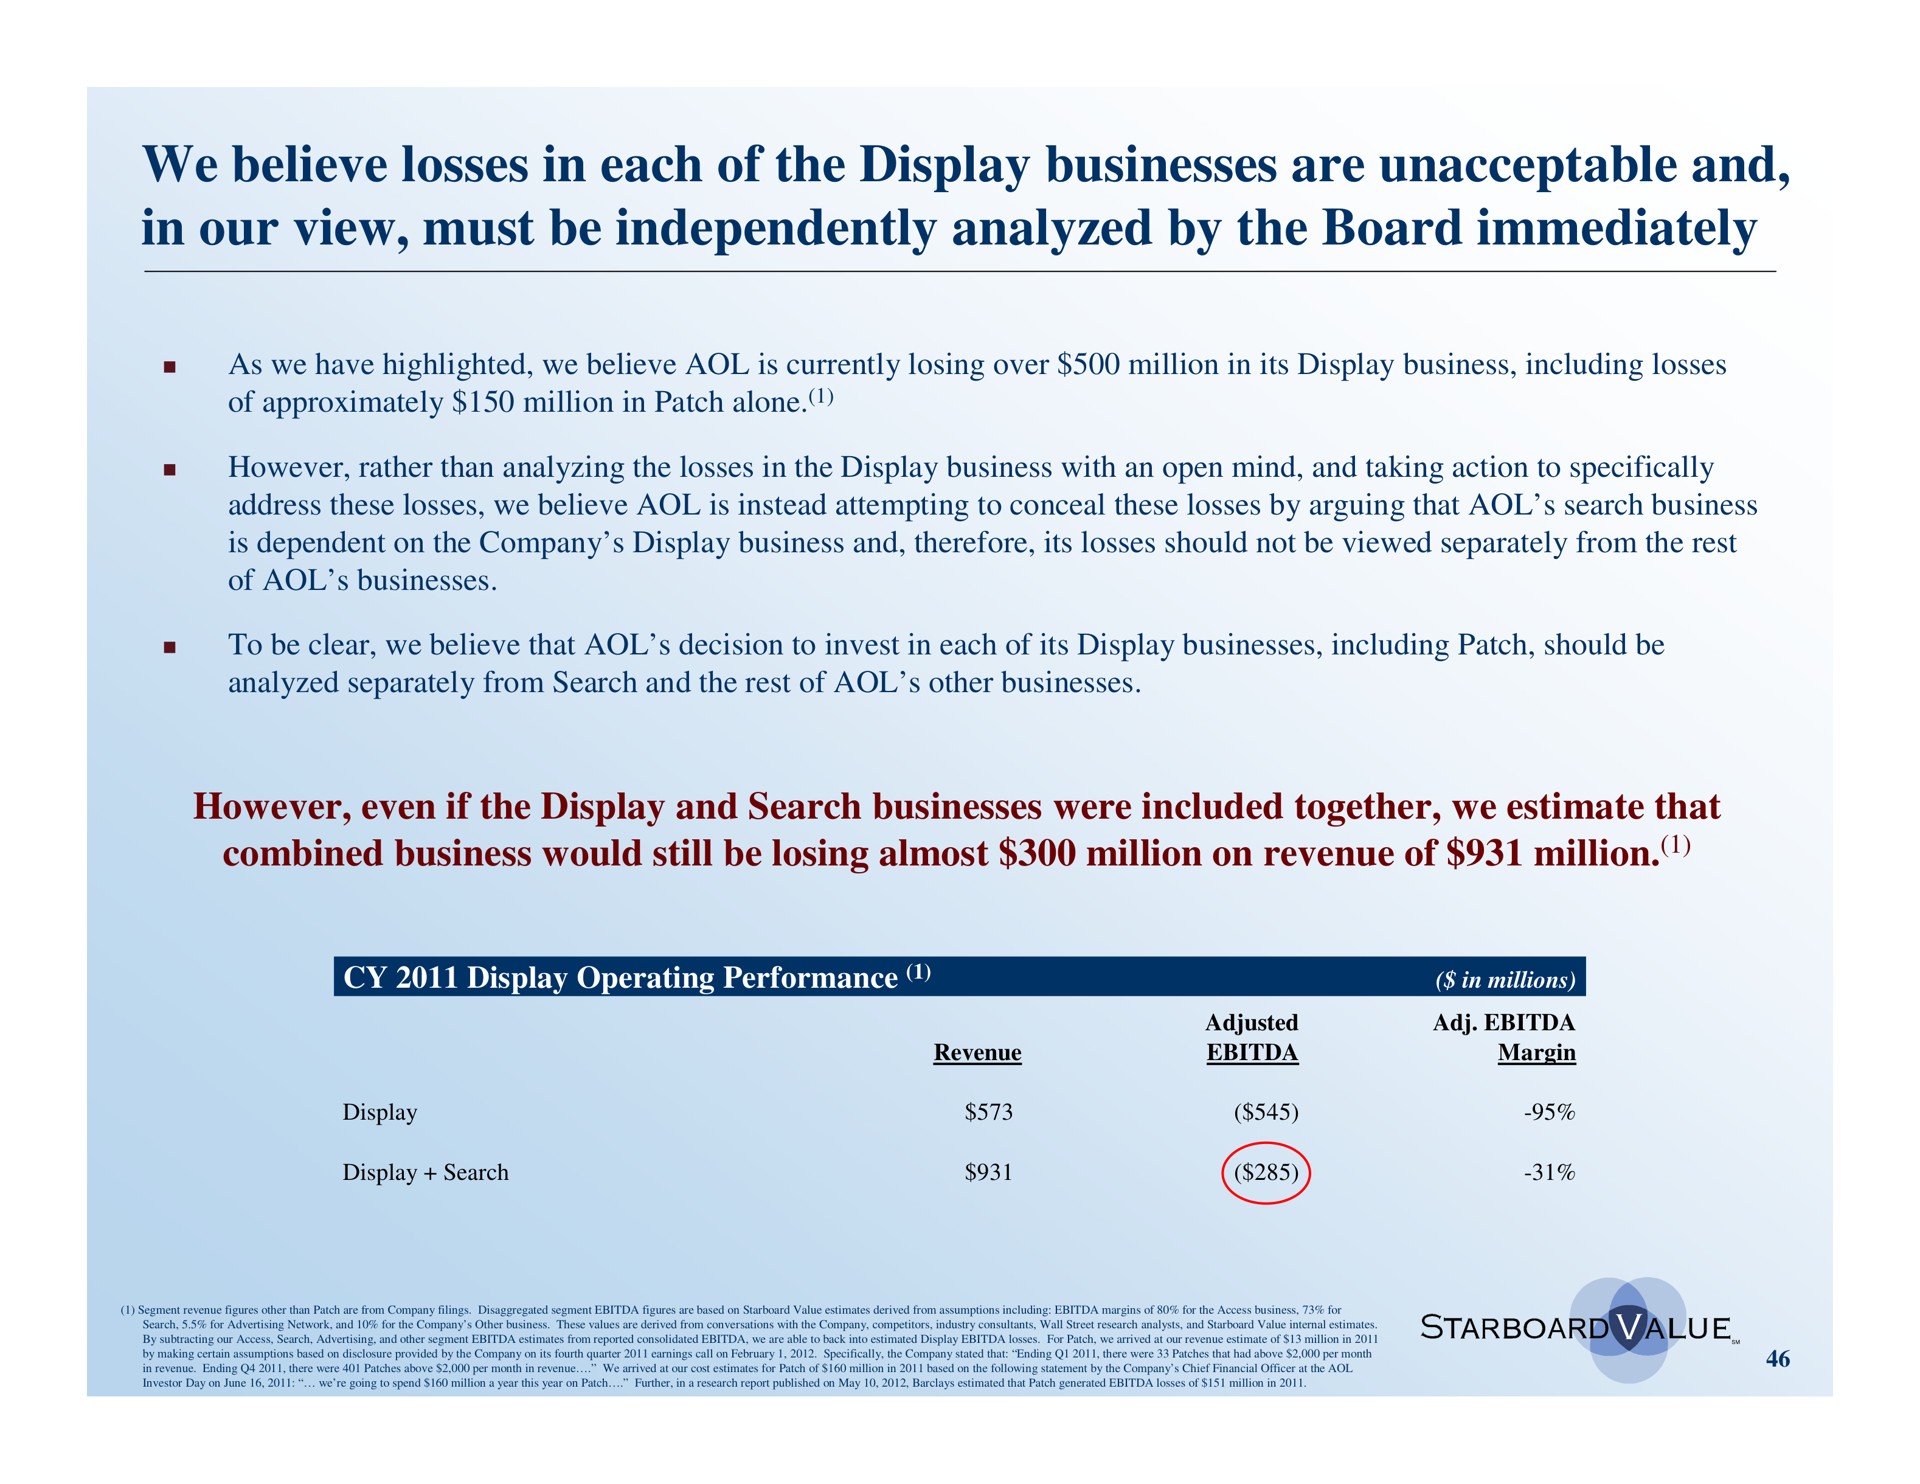 we believe losses in each of the display businesses are unacceptable and in our view must be independently analyzed by the board immediately | Starboard Value